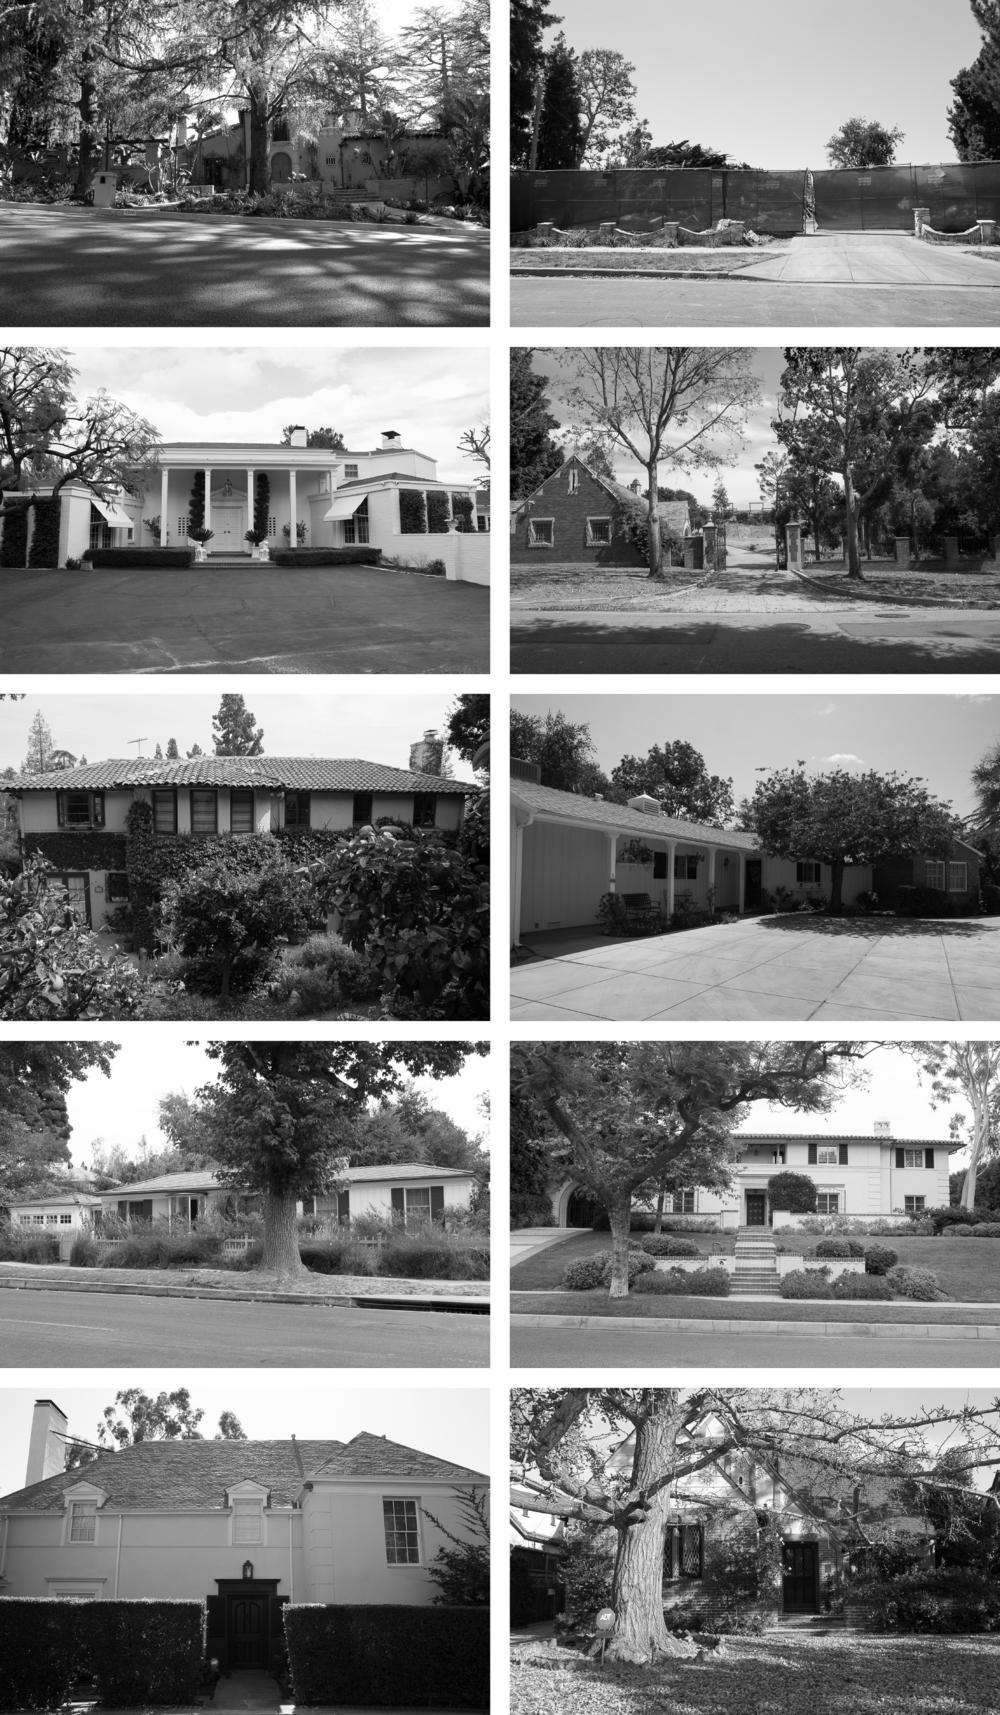 The variety of home exteriors designed by Williams in the Los Angeles area demonstrate the wide range of architectural styles he employed. Williams designed nearly 3,000 structures in his lifetime, about 2,000 of which are in LA alone.